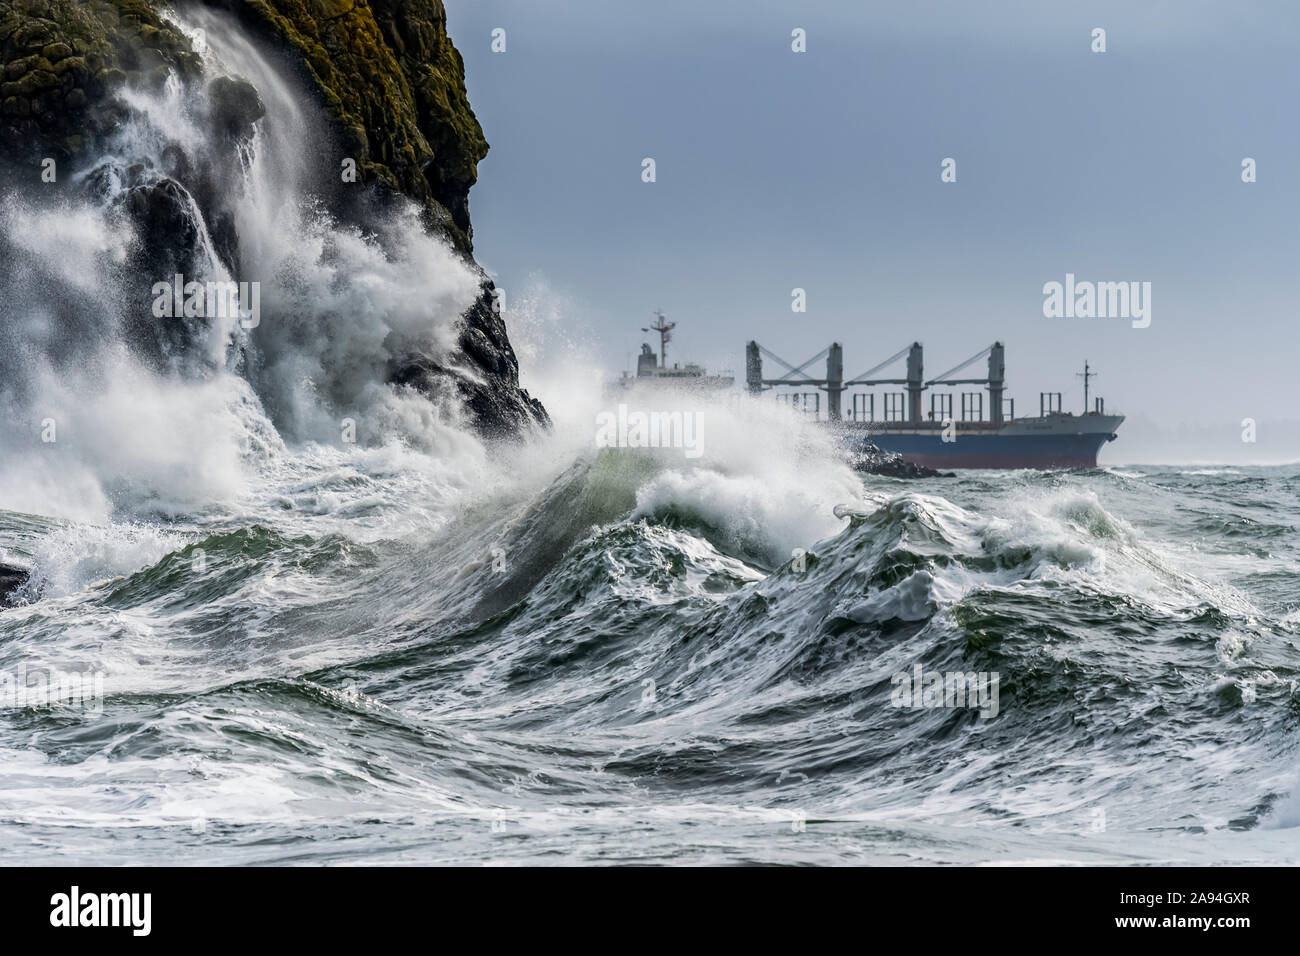 A bulk carrier ship passes Cape Disappointment at rhe mouth of the Columbia River; Ilwaco, Washington, United States of America Stock Photo